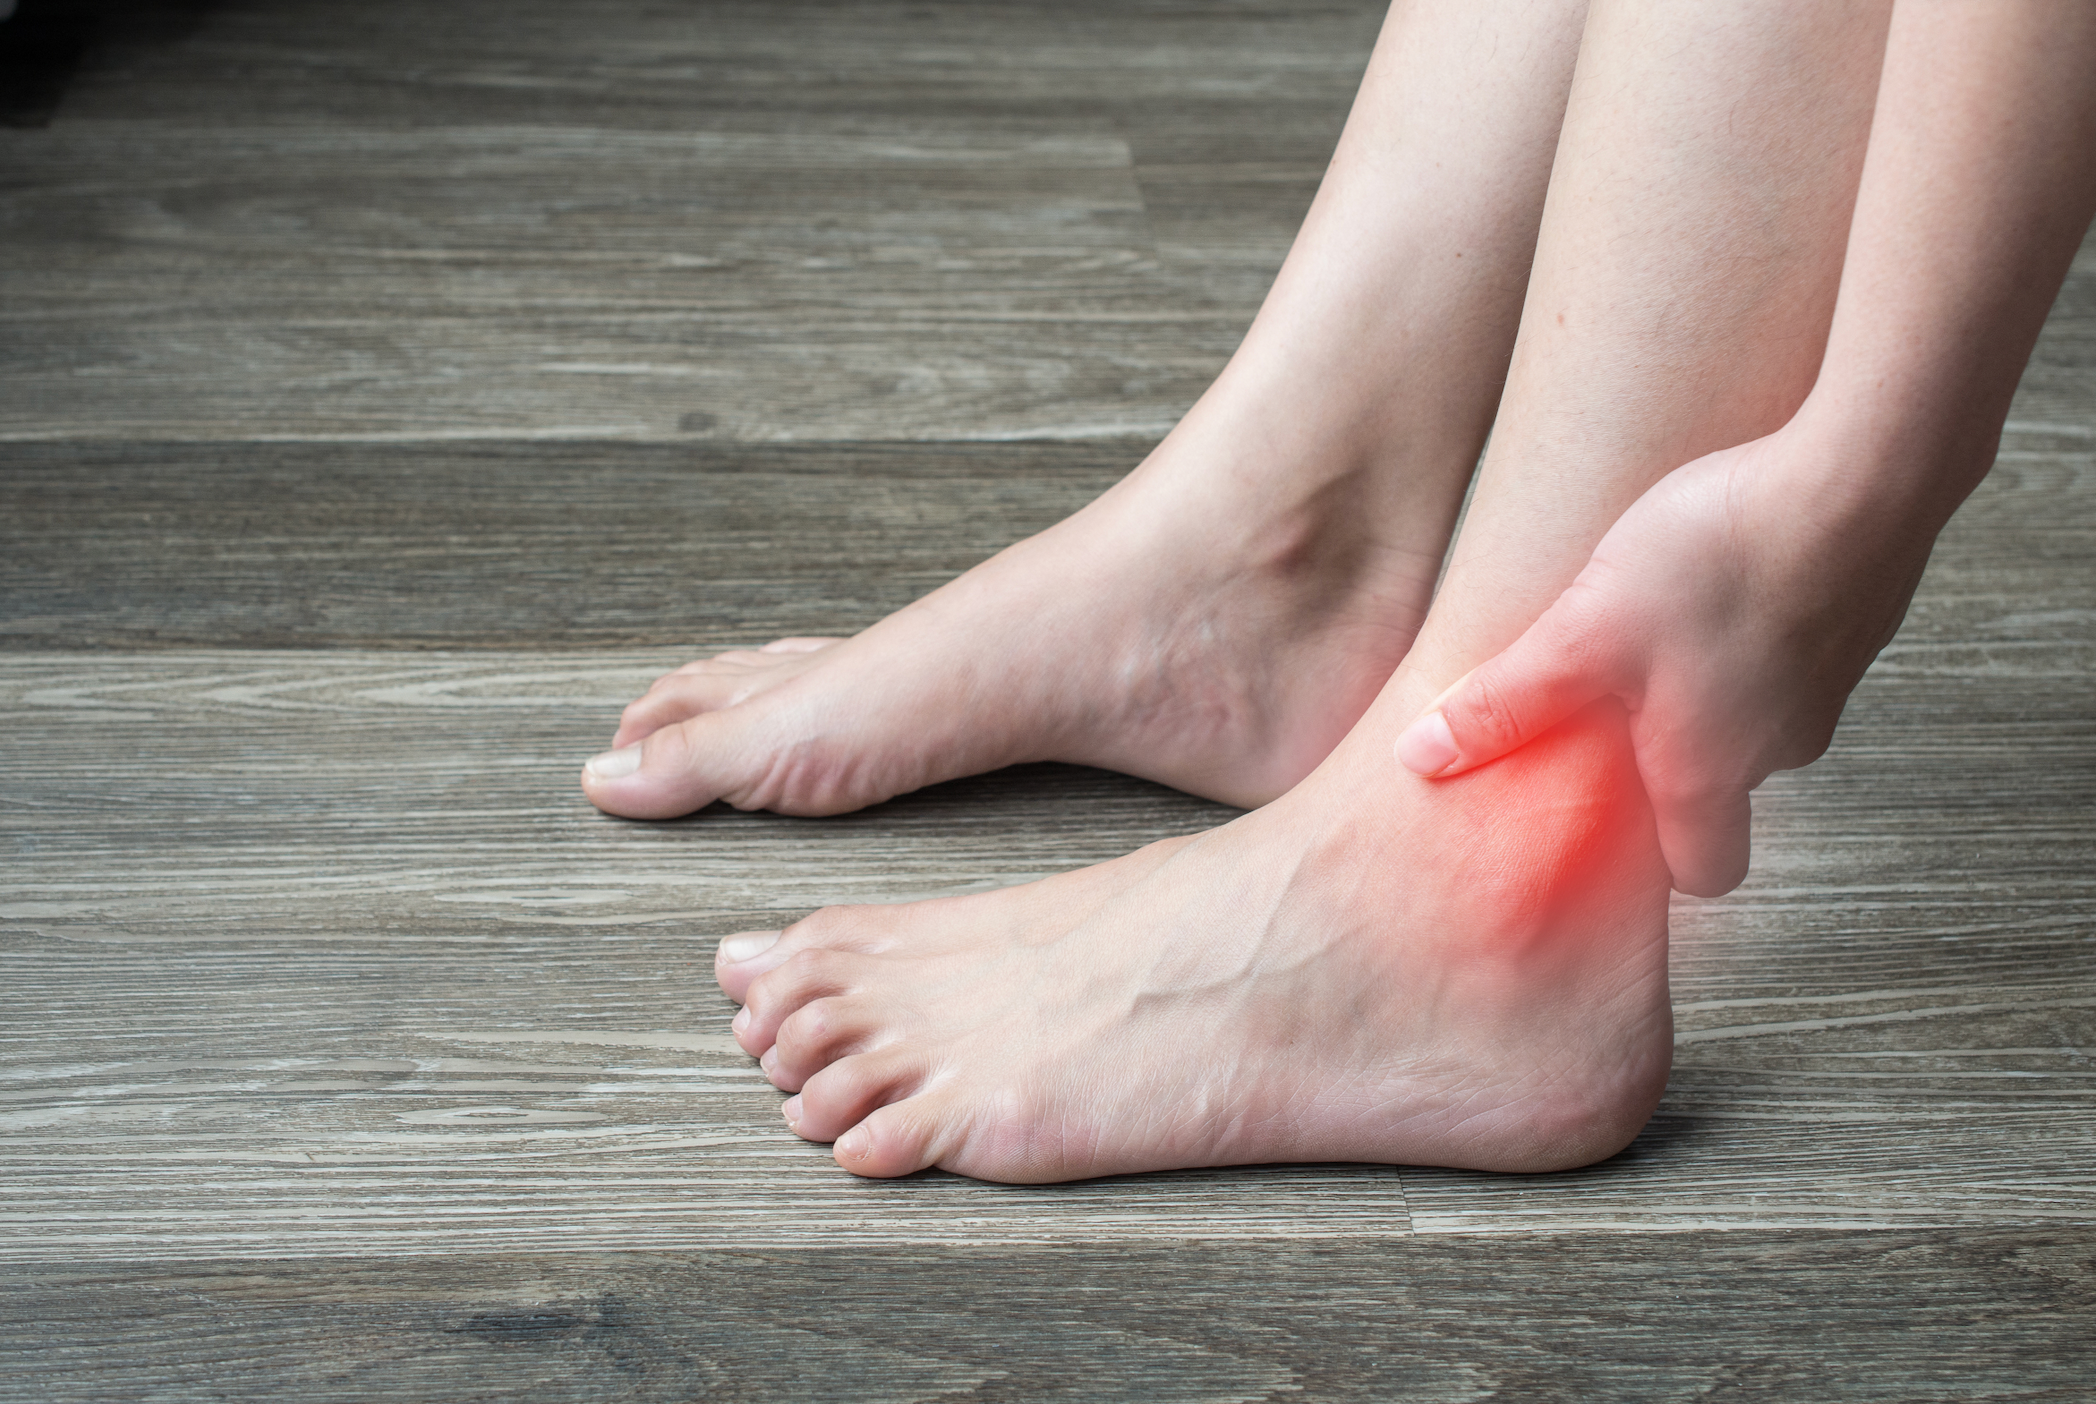 Gout Prevalence Decreases with a Greater Oxidative Balance Score